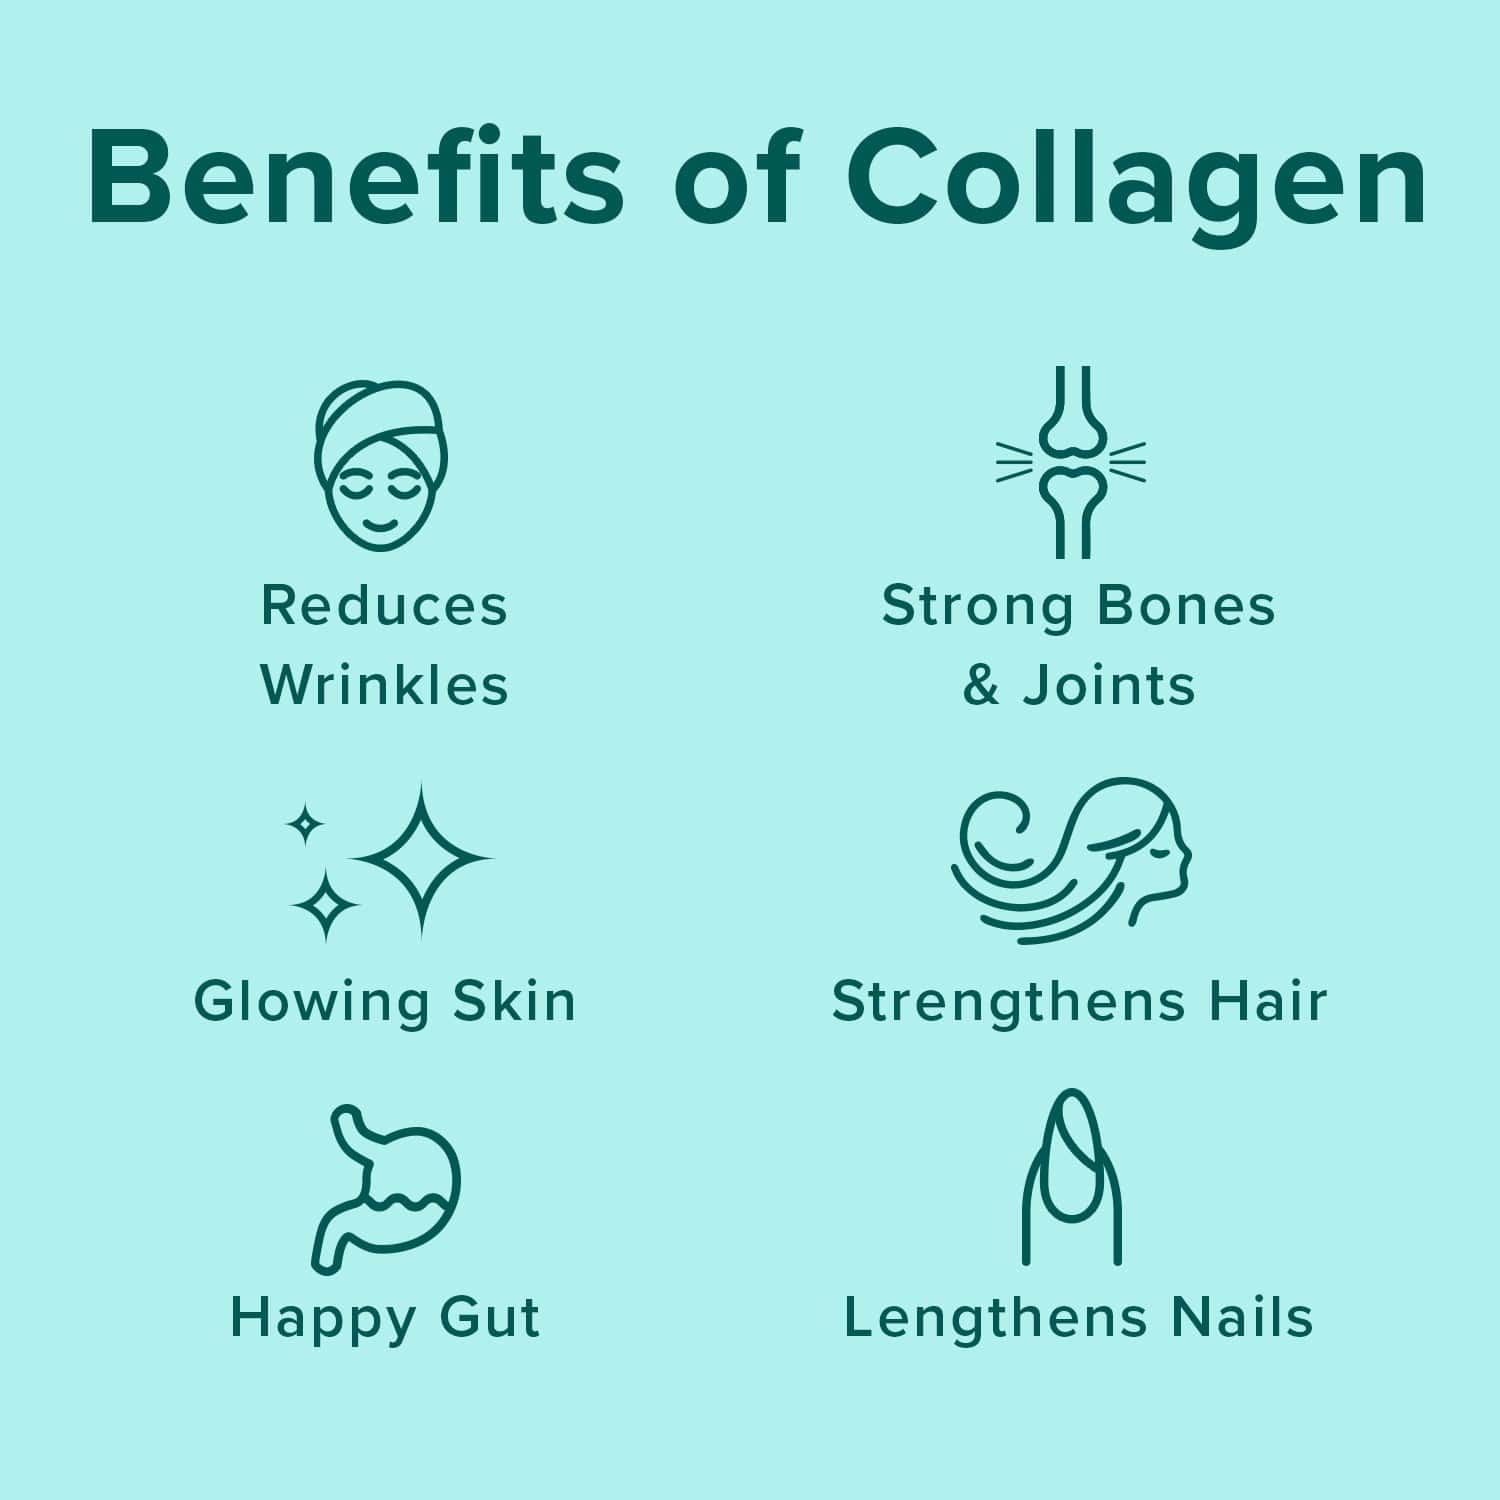 Collagen Peptides Benefits: Reduces Wrinkles, Strong Bones & Joints, Glowing Skin, Strengthens Hair, Happy Gut, Lengthens Nails